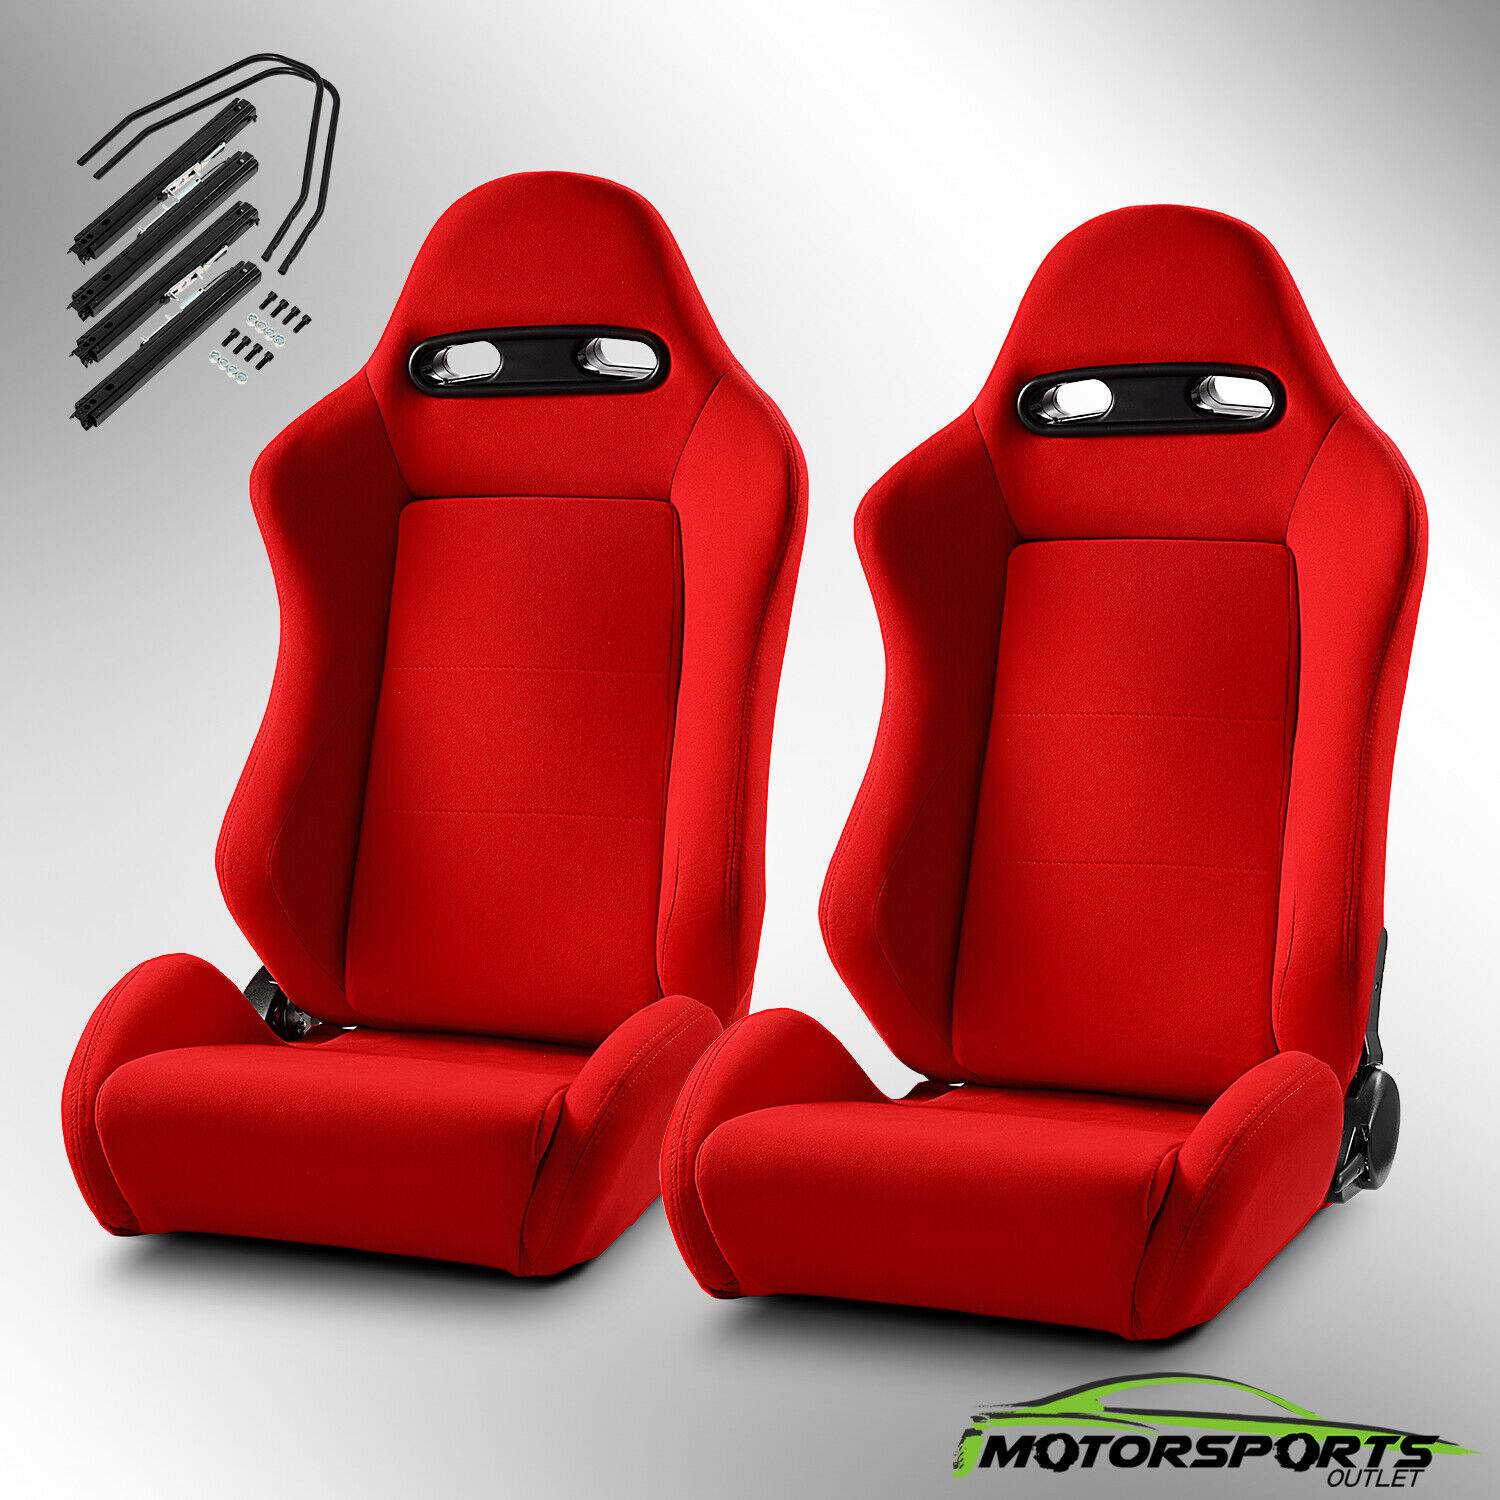 Reclinable Red Fabric Classic Style Racing Seats Left/Right W/Slider